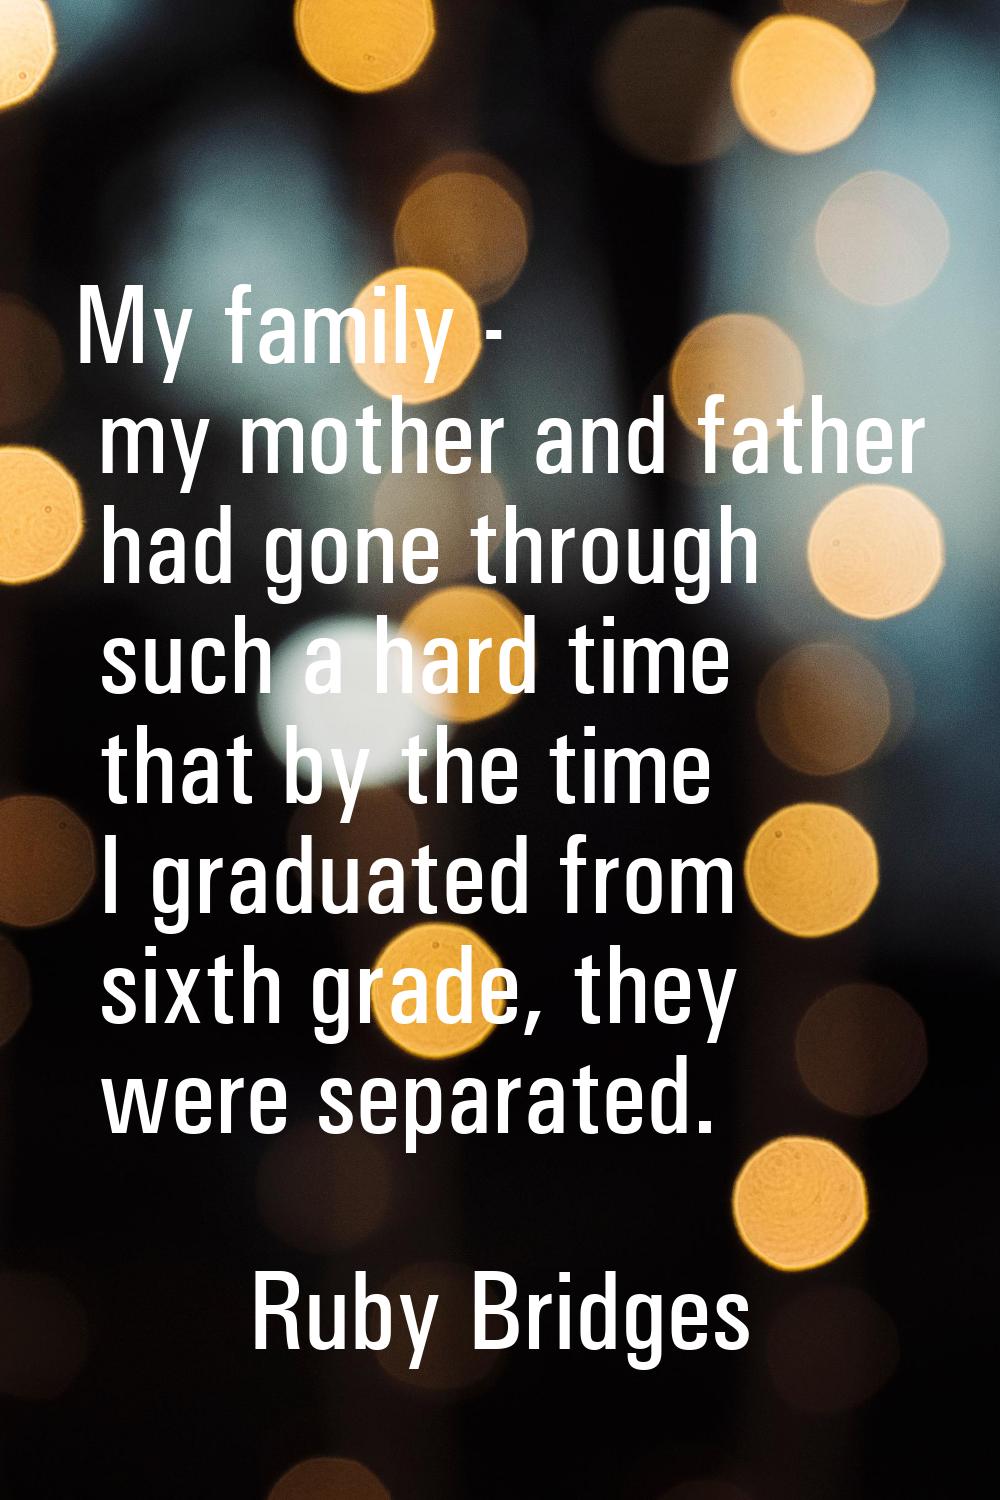 My family - my mother and father had gone through such a hard time that by the time I graduated fro